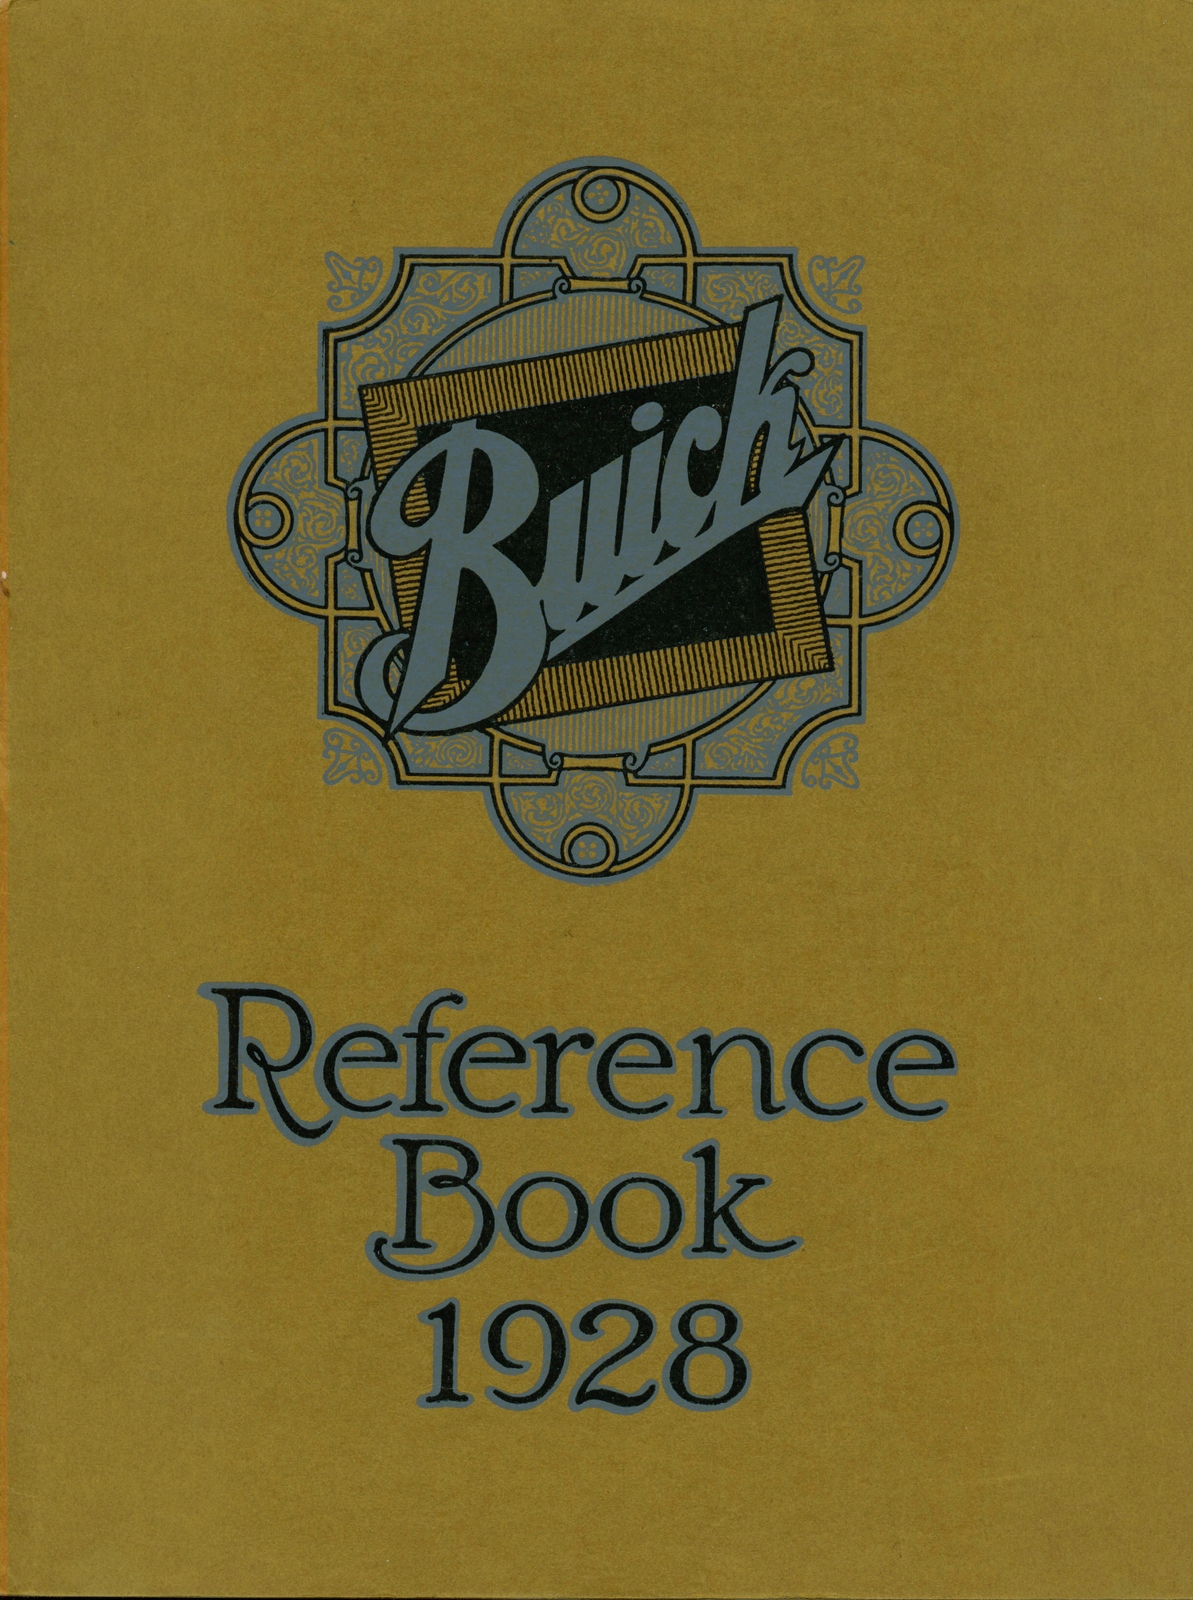 n_1928 Buick Reference Book-00.jpg